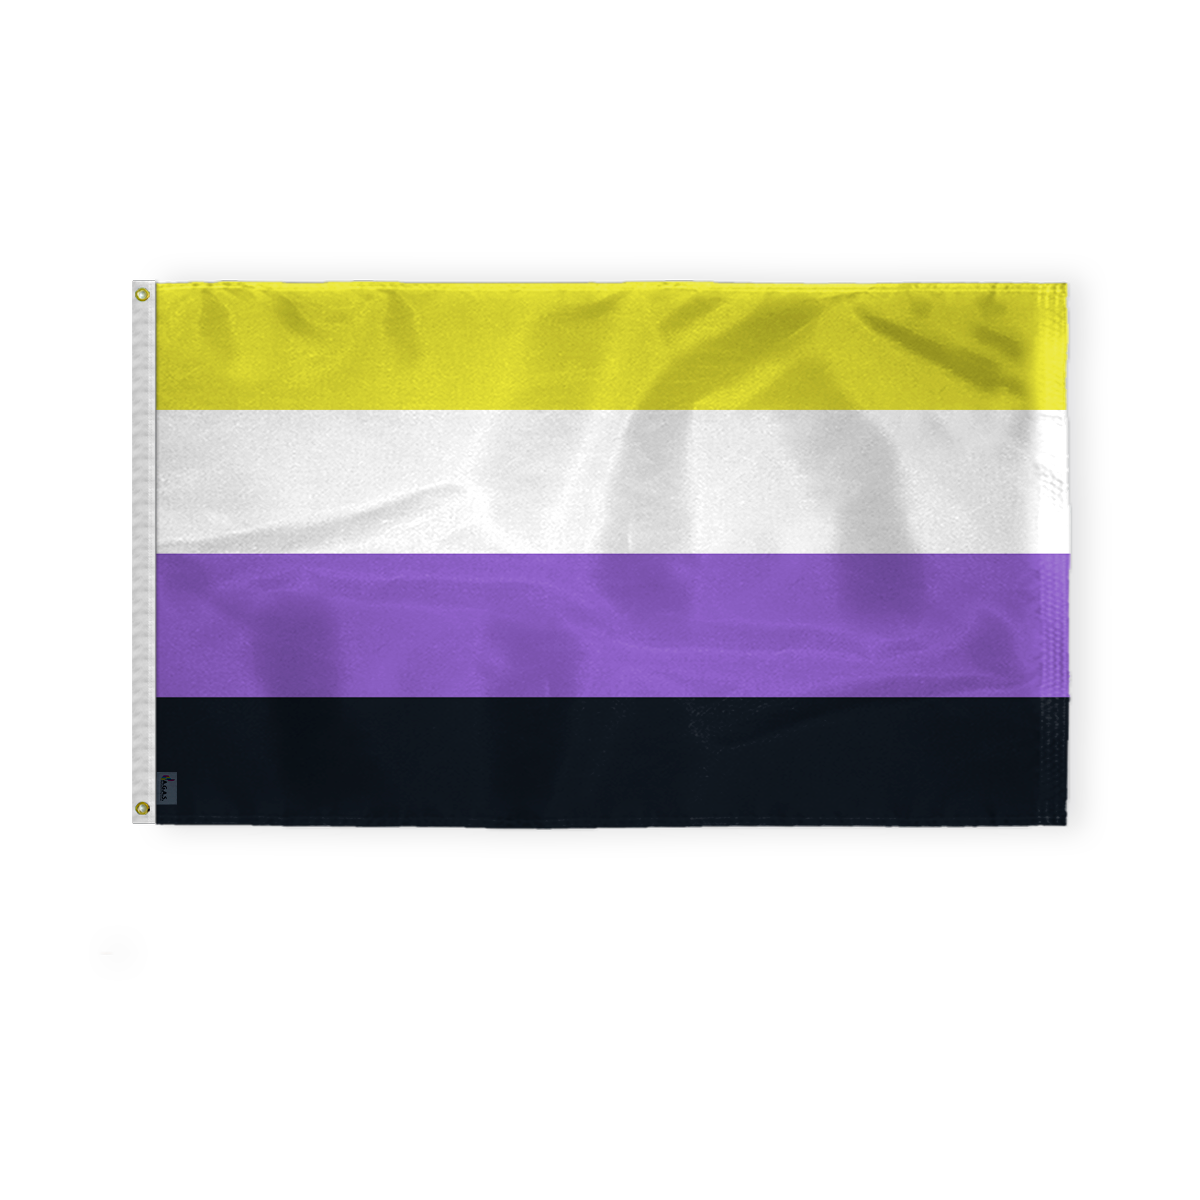 AGAS Non Binary Pride Flag 3x5 Ft - Double Sided Printed 200D Nylon